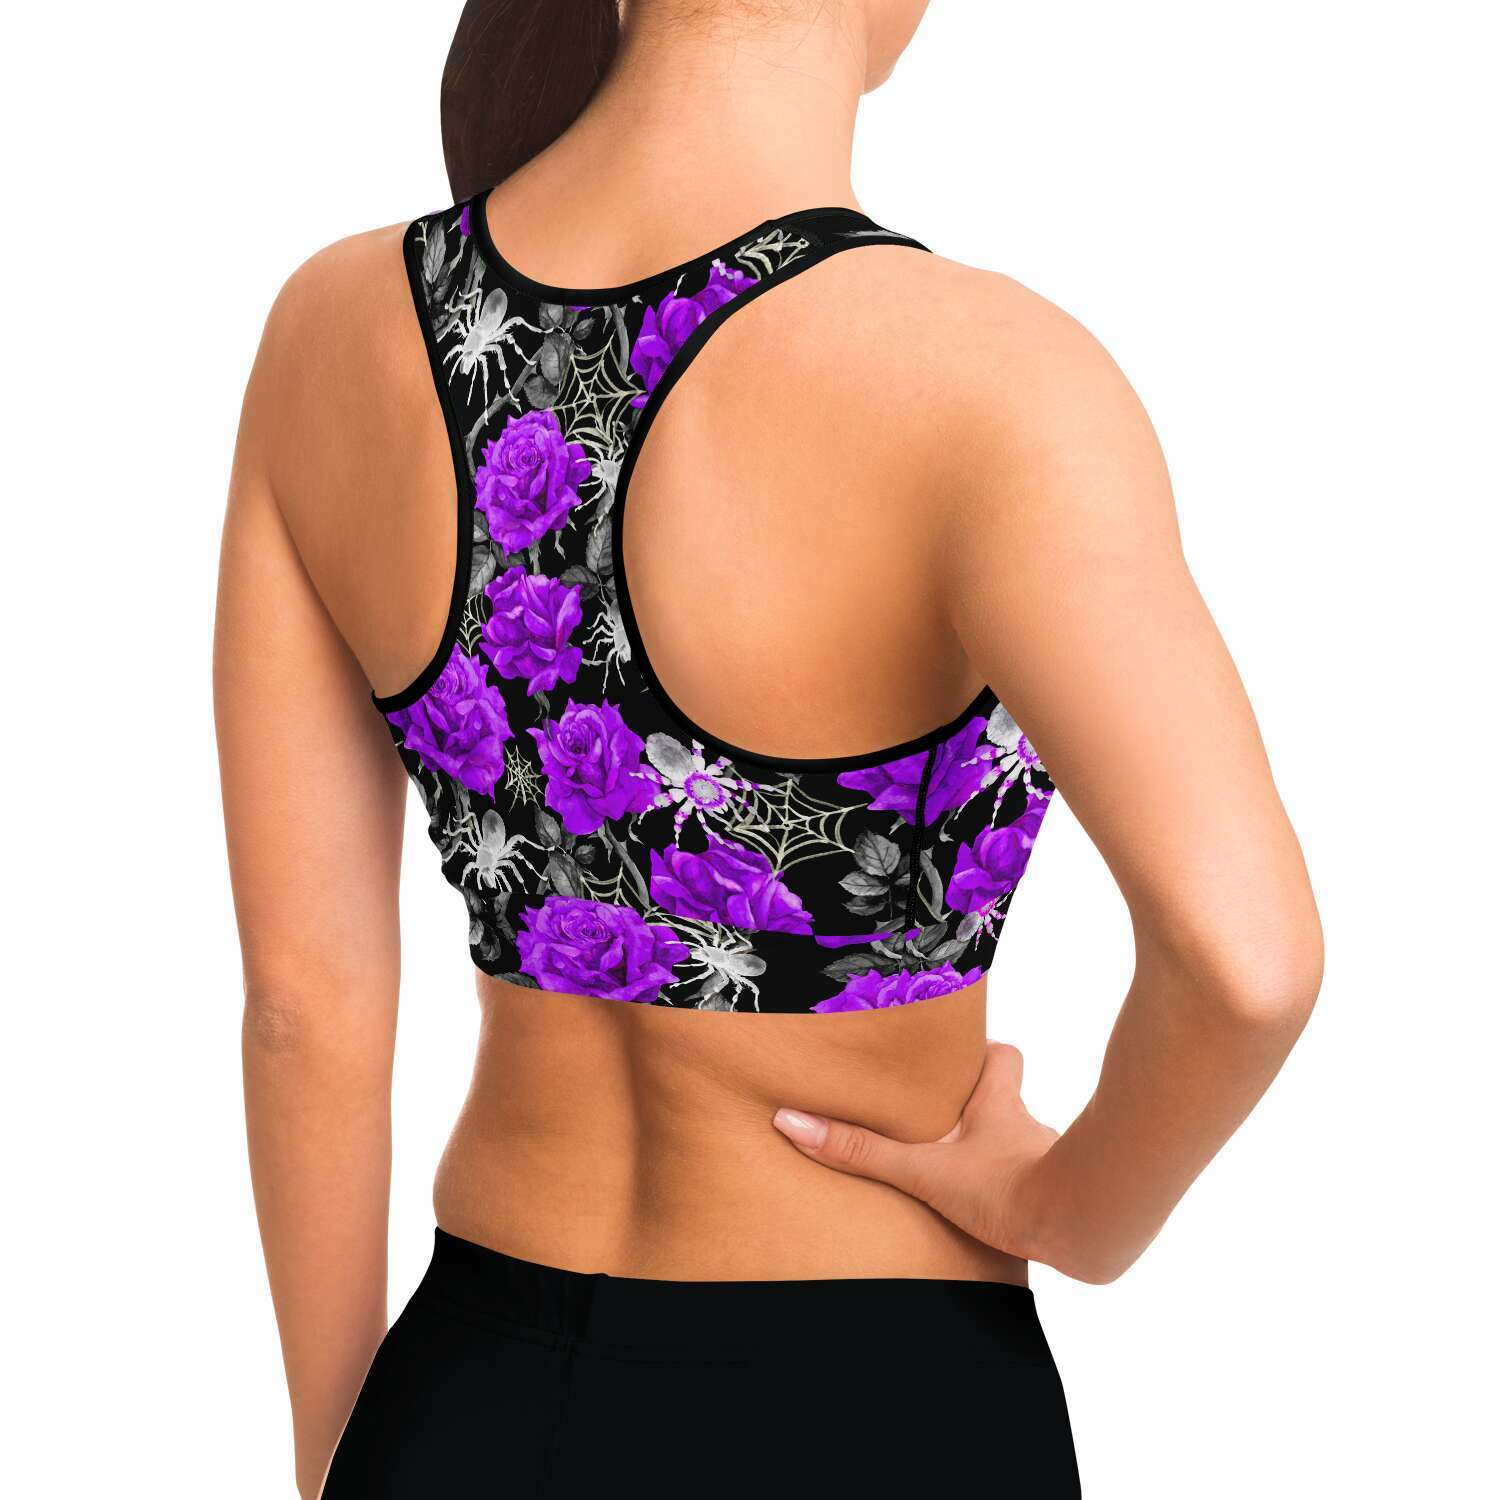 Women's Deadly Purple Roses & Spiders Halloween Athletic Sports Bra Model Right